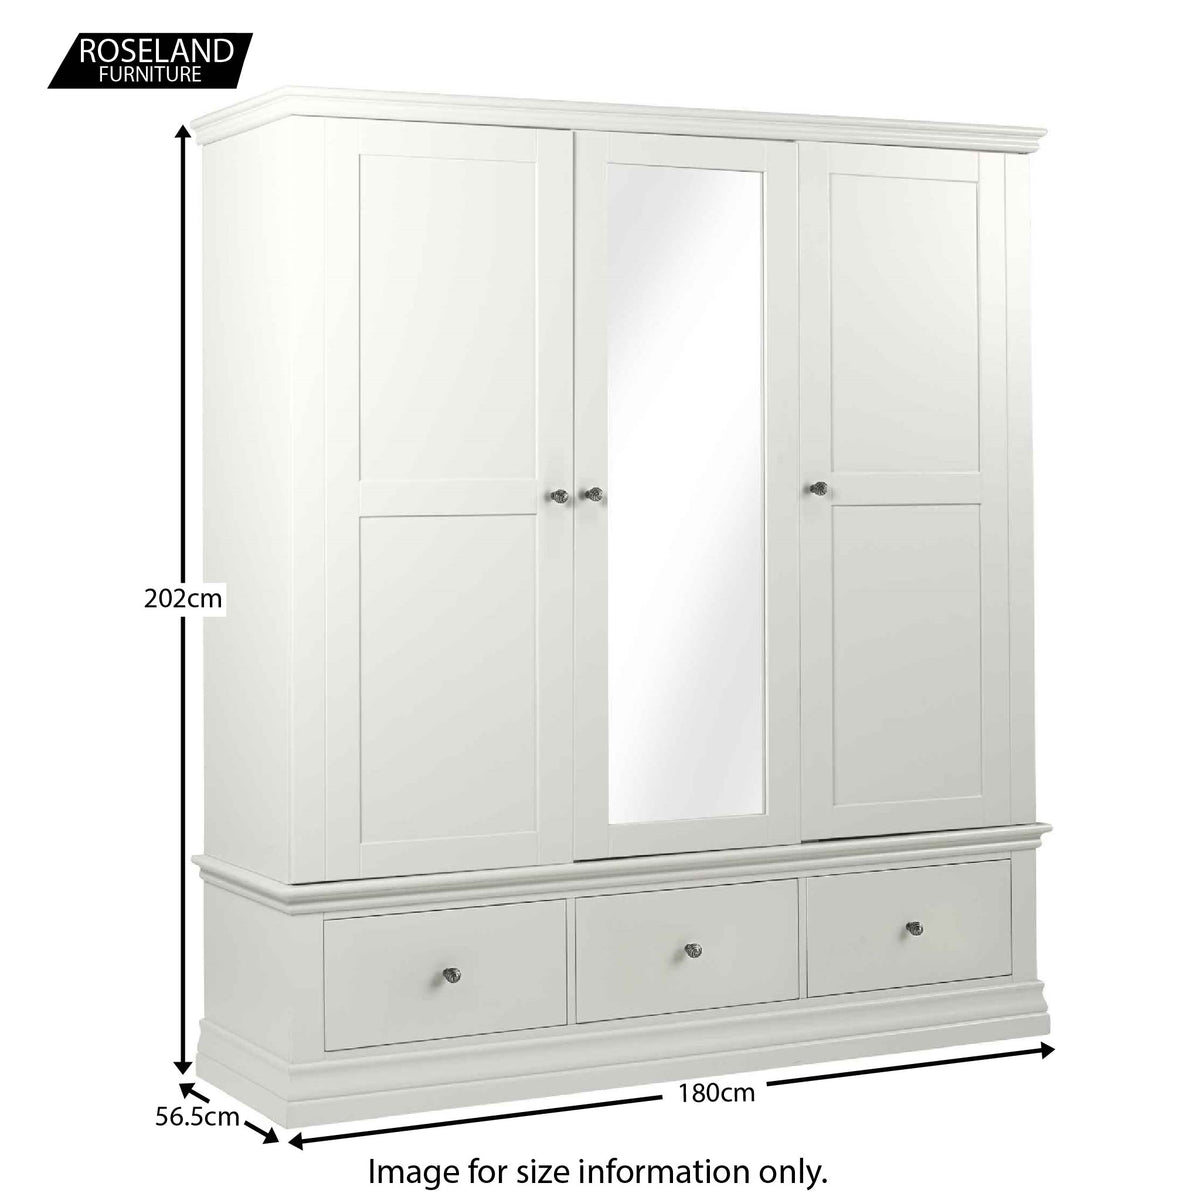 Dimensions for the Melrose White Triple Wardrobe with Mirror and Drawers from Roseland Furniture